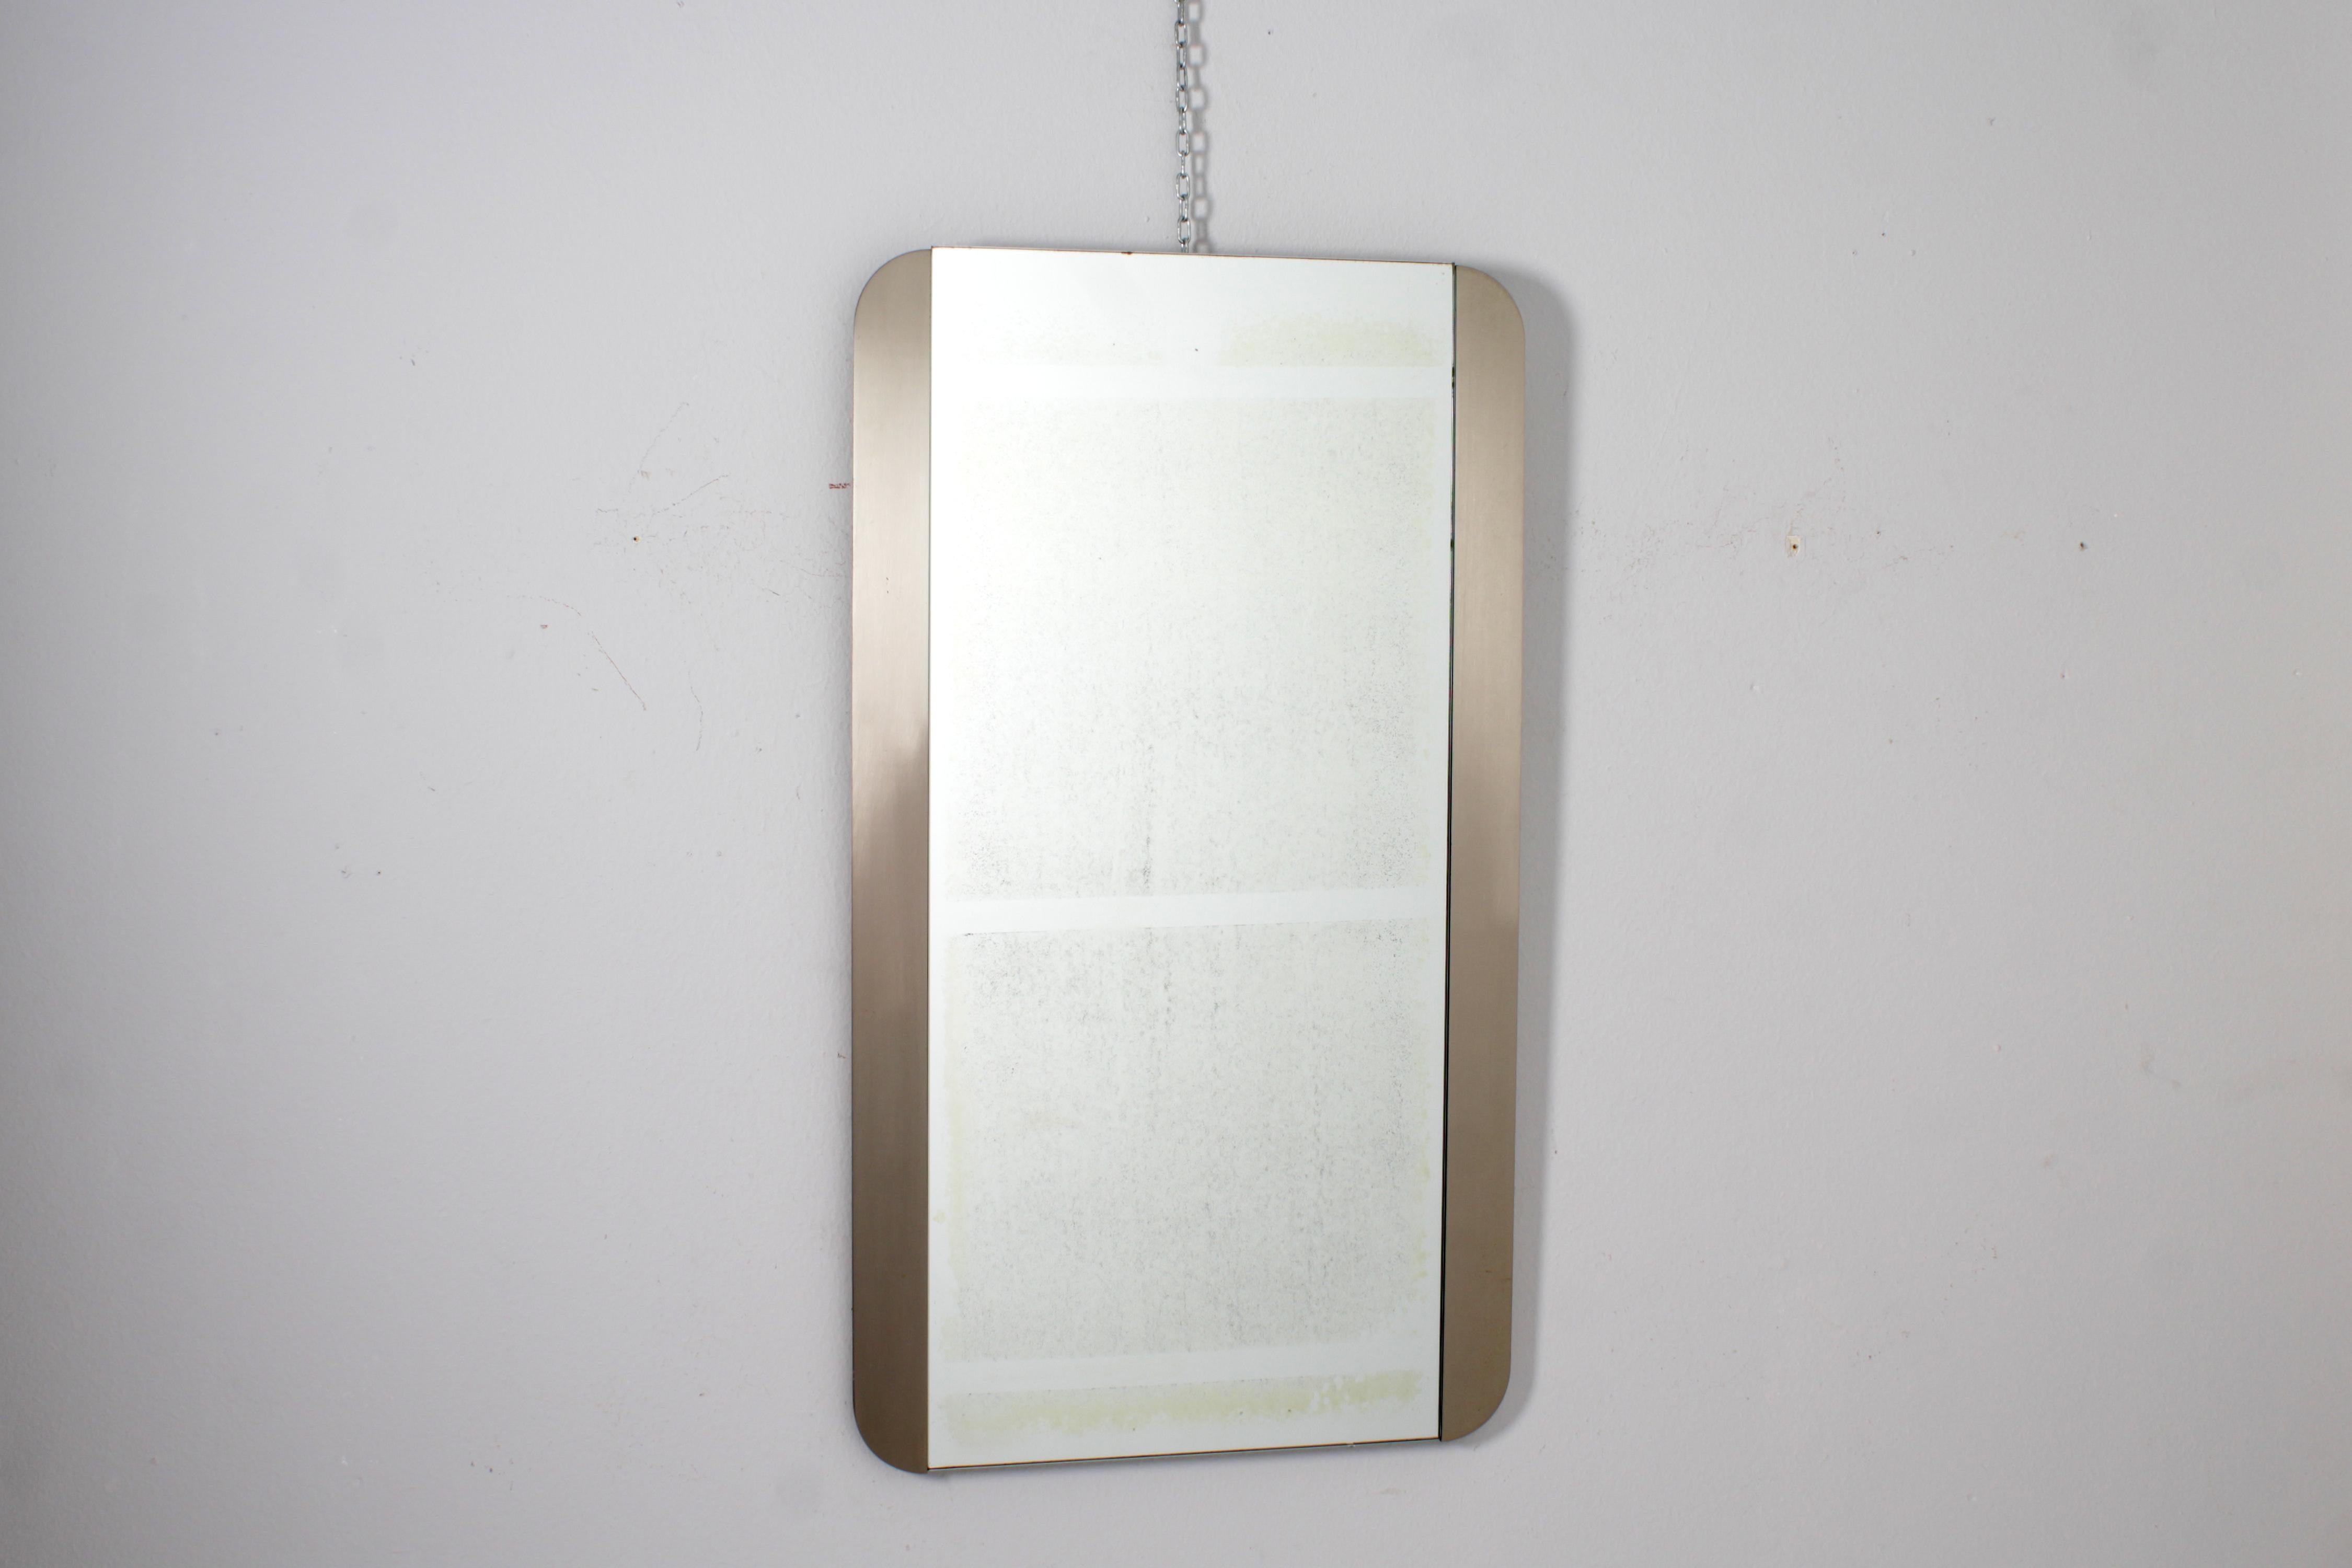 Stylish rectangular wall mirror with satin metal side bands with beveled corners. Rear panel in white lacquered wood. Italian production from the 1970s.
Wear consistent with age and use.